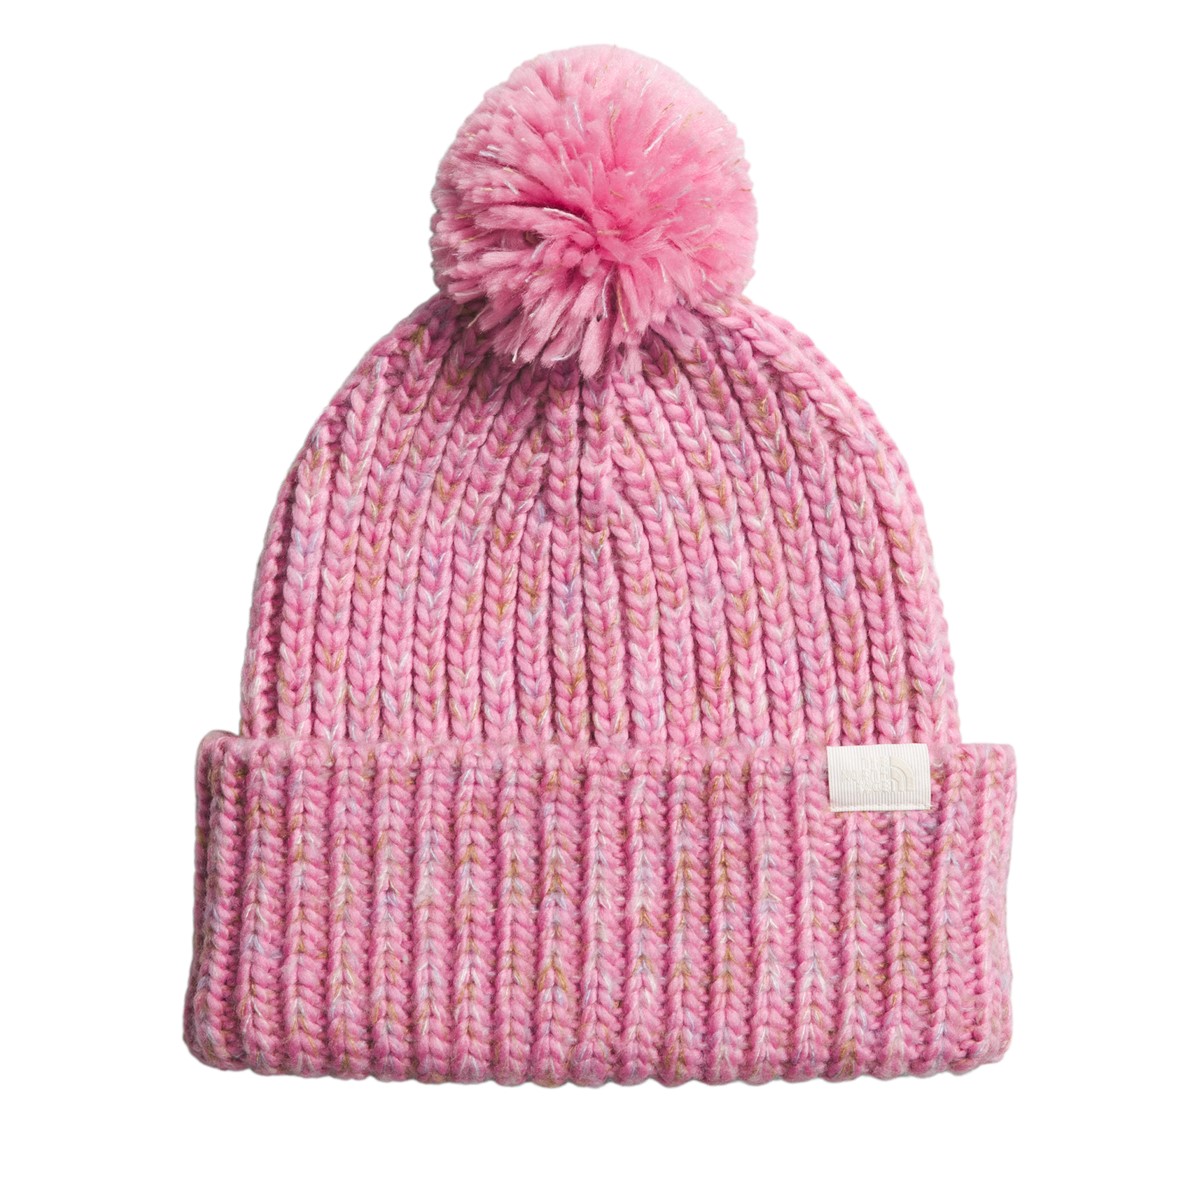 Tuque Cozy Chunky rose